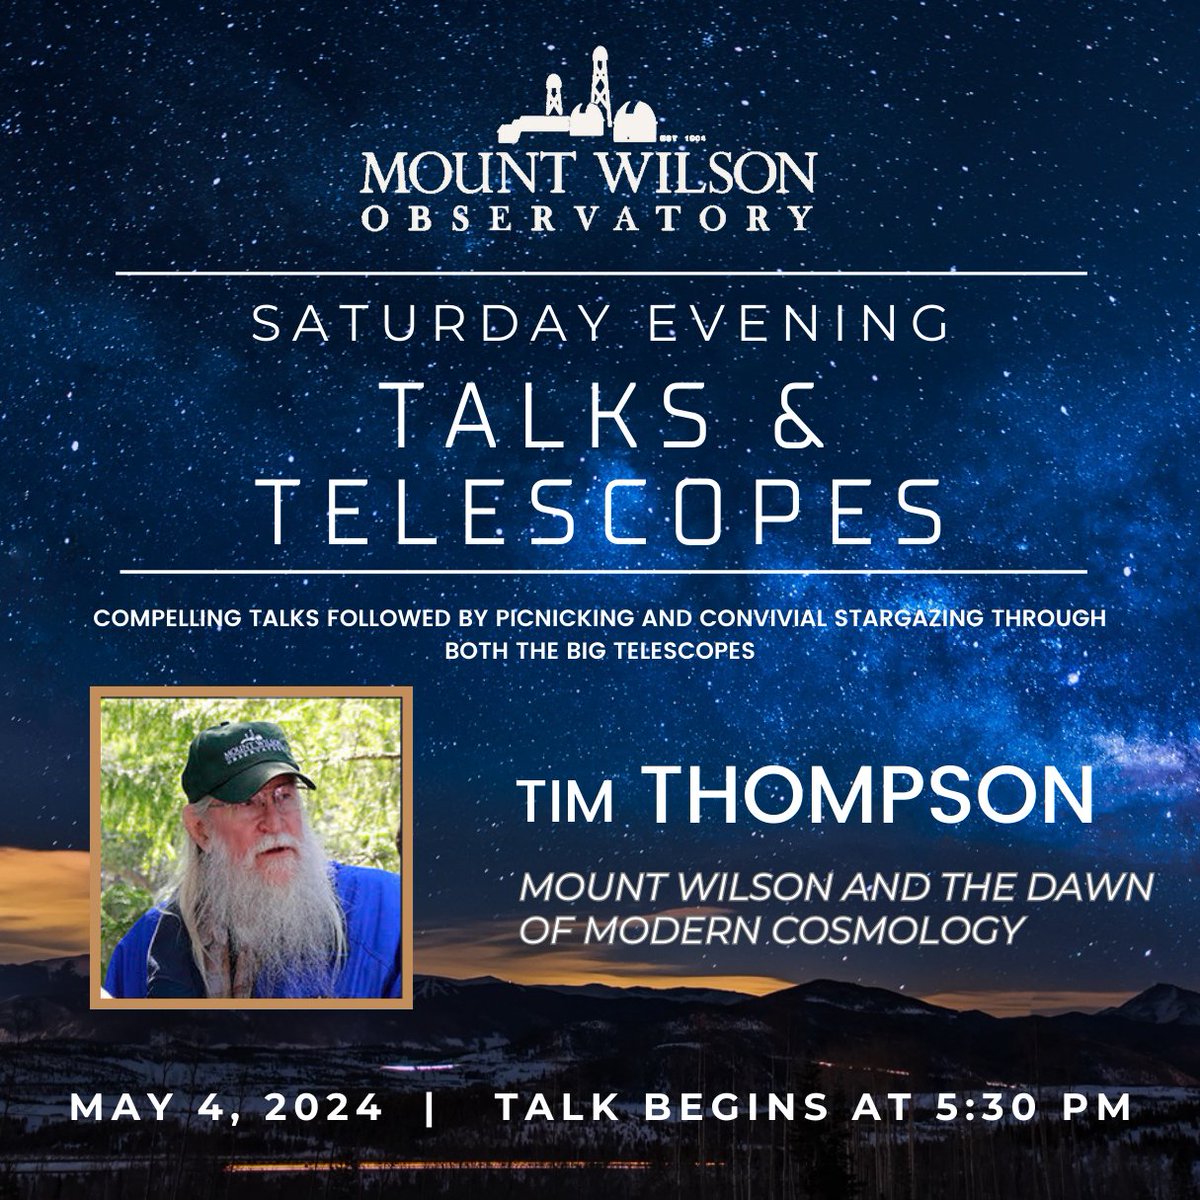 Sat May 4 | 5:30PM Mount Wilson Observatory & the Dawn of Modern Cosmology - a family-friendly presentation introducing “cosmology” as it was known in the early 20th century. Following the lecture view the night sky thru our historic telescopes. mtwilson.edu/events/lecture…